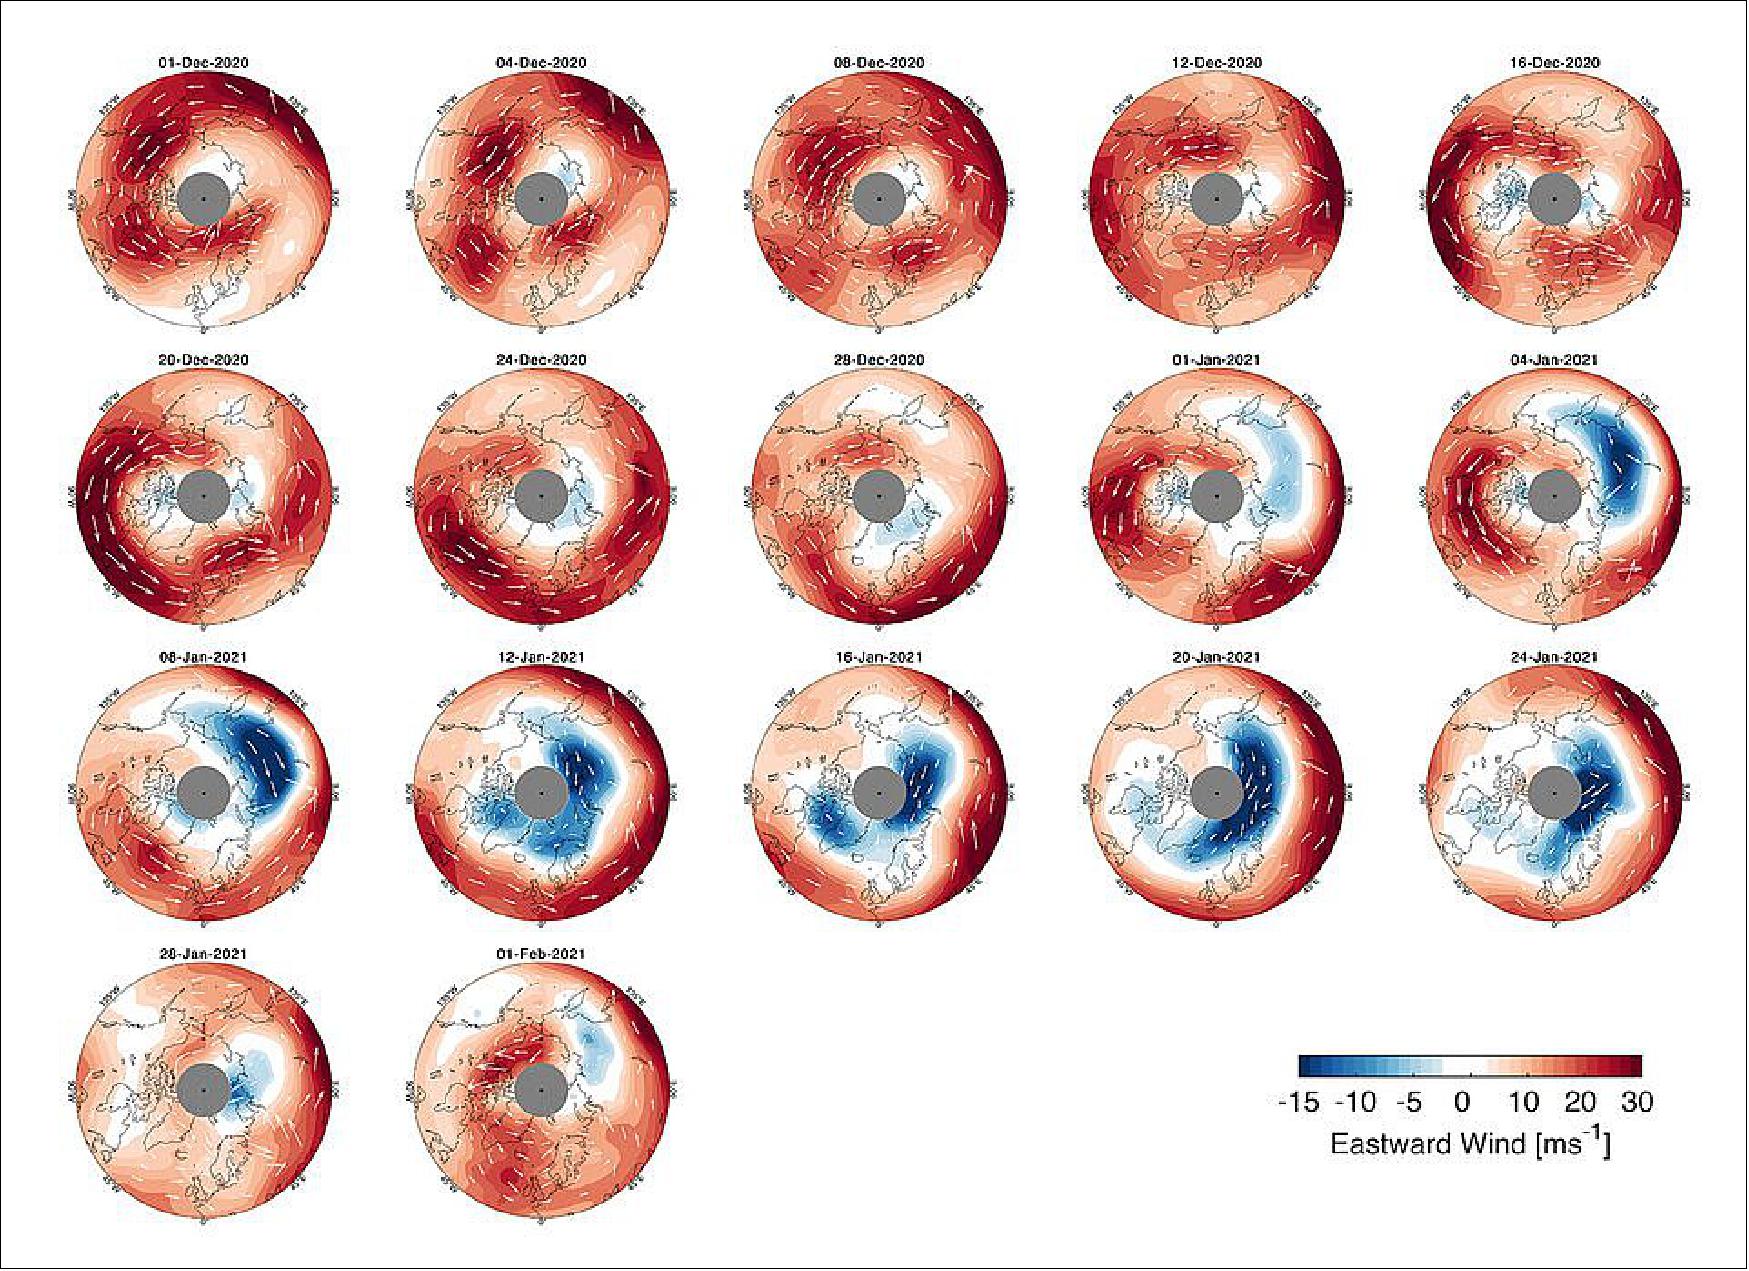 Figure 17: Based on data from ESA's Aeolus wind mission, the image shows how the polar vortex in the lower stratosphere changed between 1 December 2020 and 1 February 2021. The first few plots at the beginning of December show the vortex in a comparatively normal state, but in mid-December patches of blue wind appear, and the wind is going backwards relative to normal conditions (image credit: University of Bath/C. Wright)